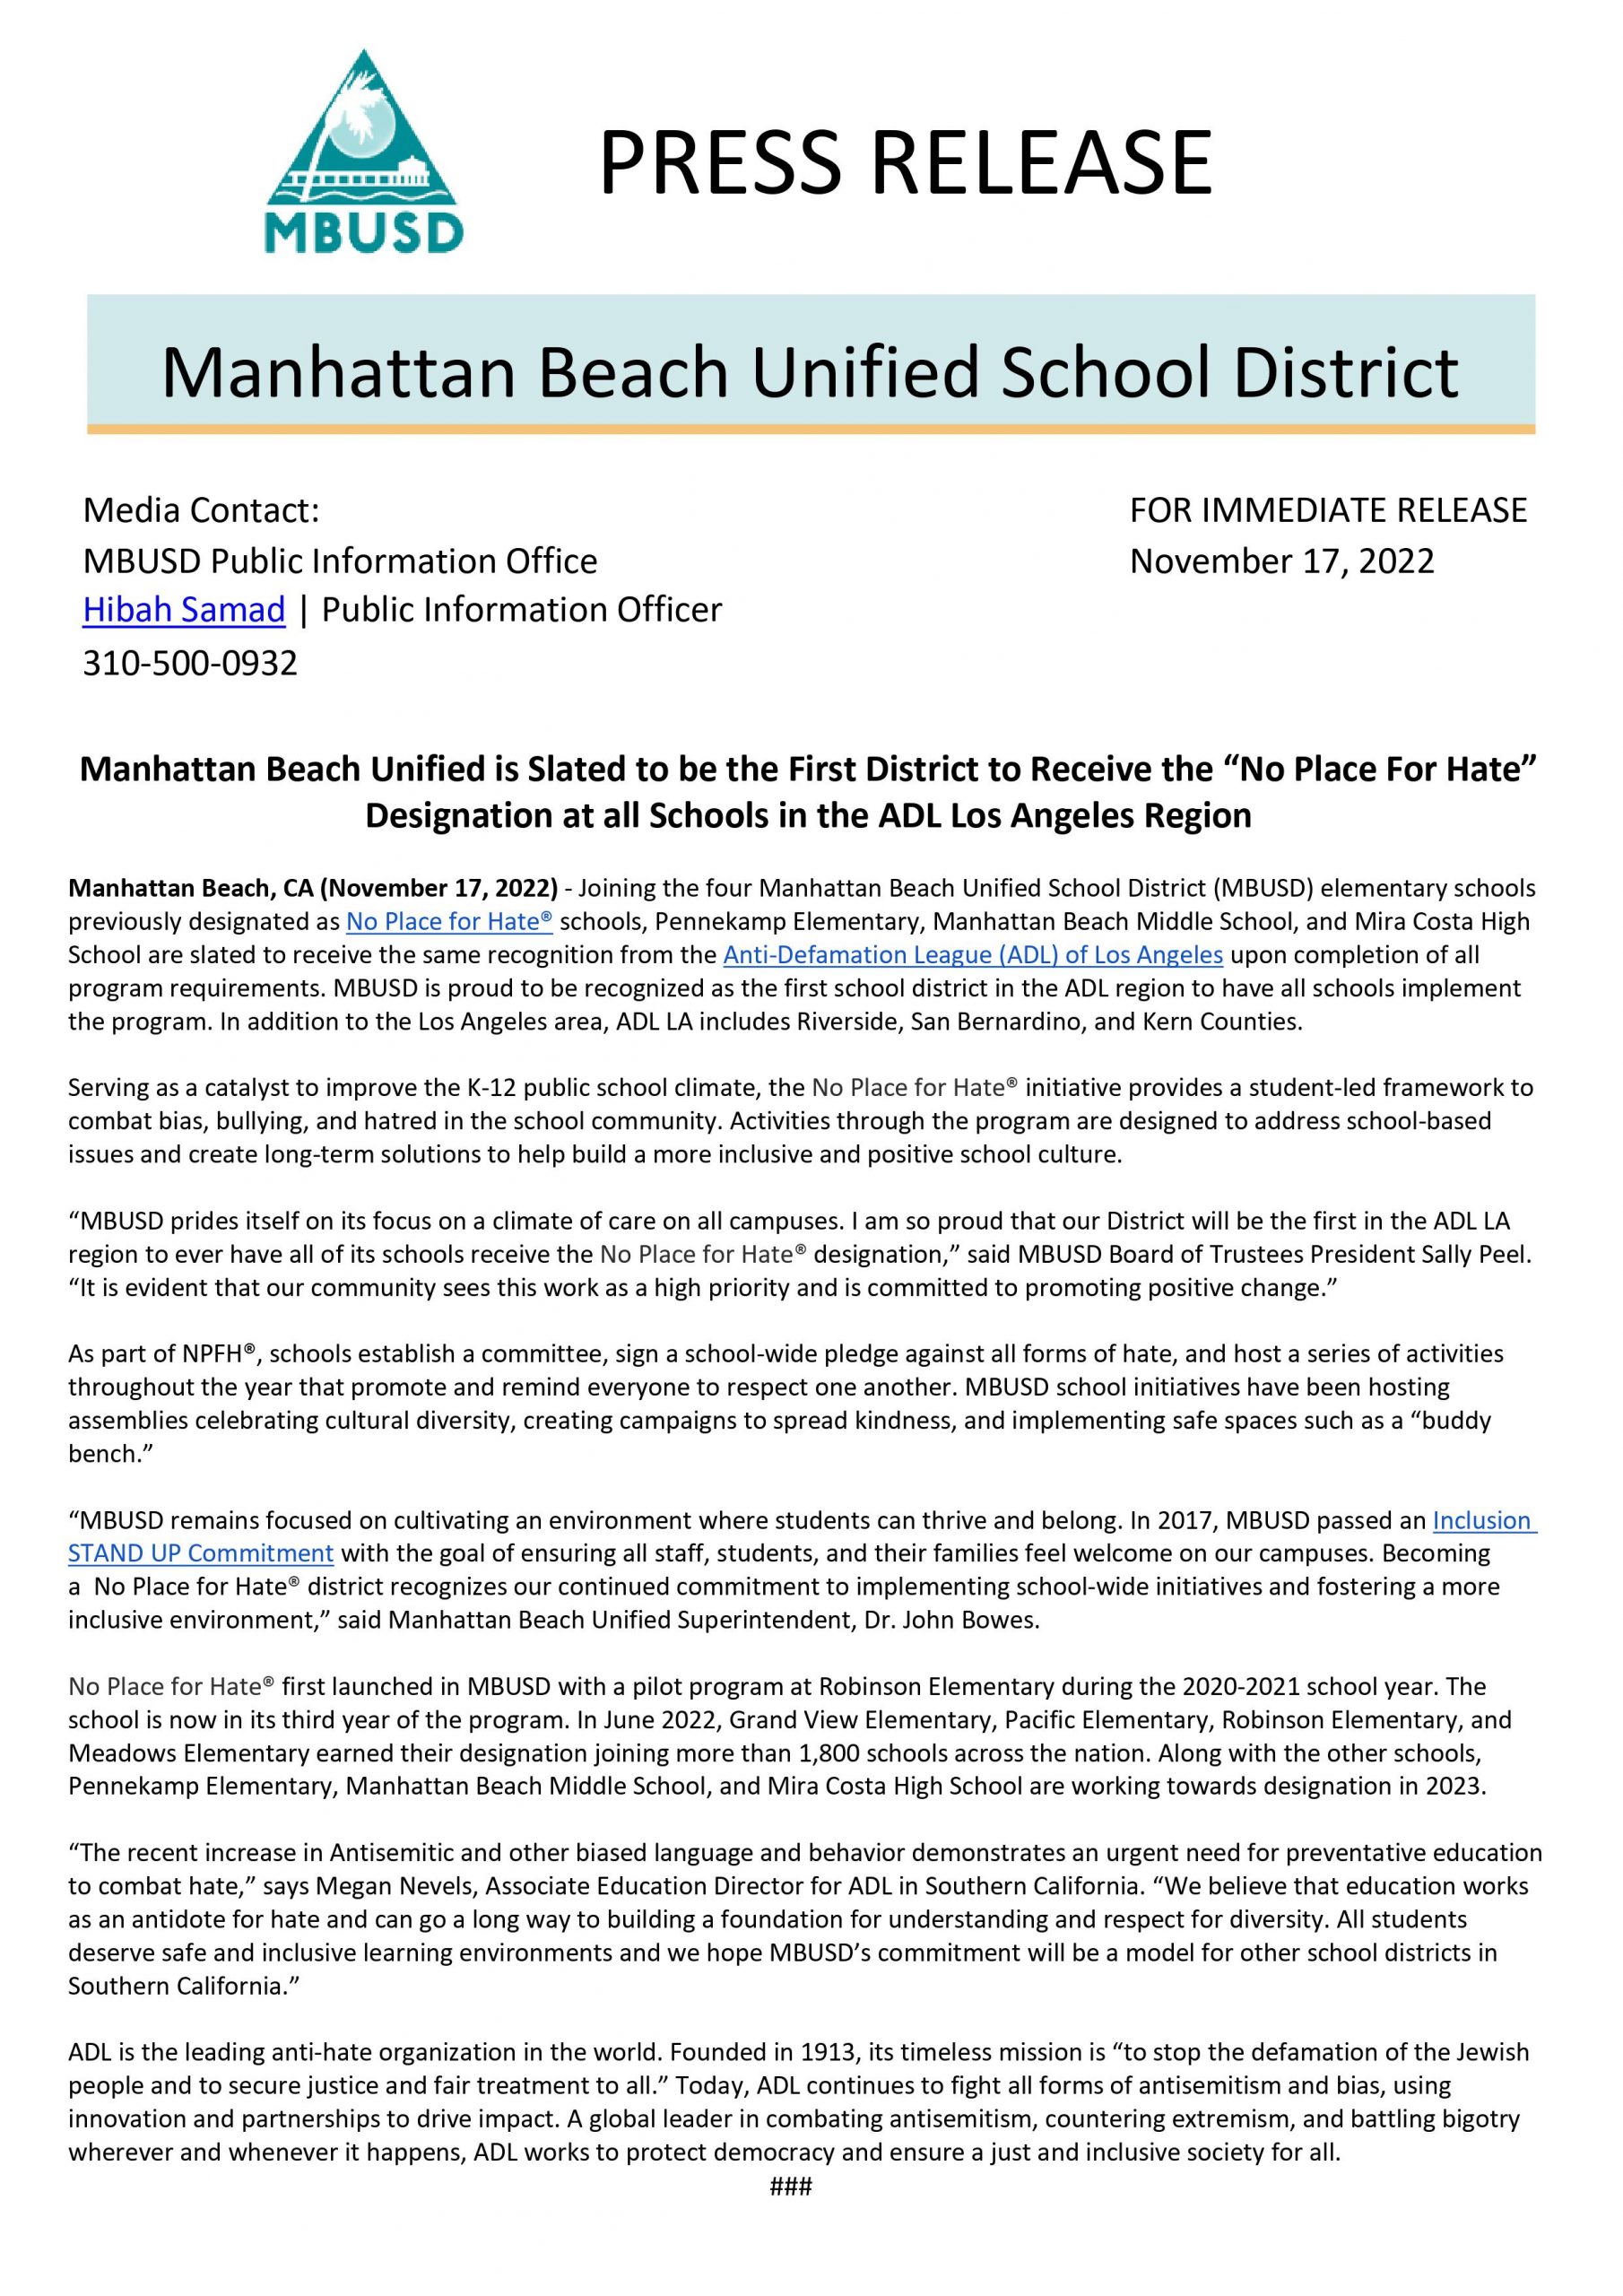 anti-defamation-league-manhattan-beach-unified-school-district-to-be-first-no-place-for-hate